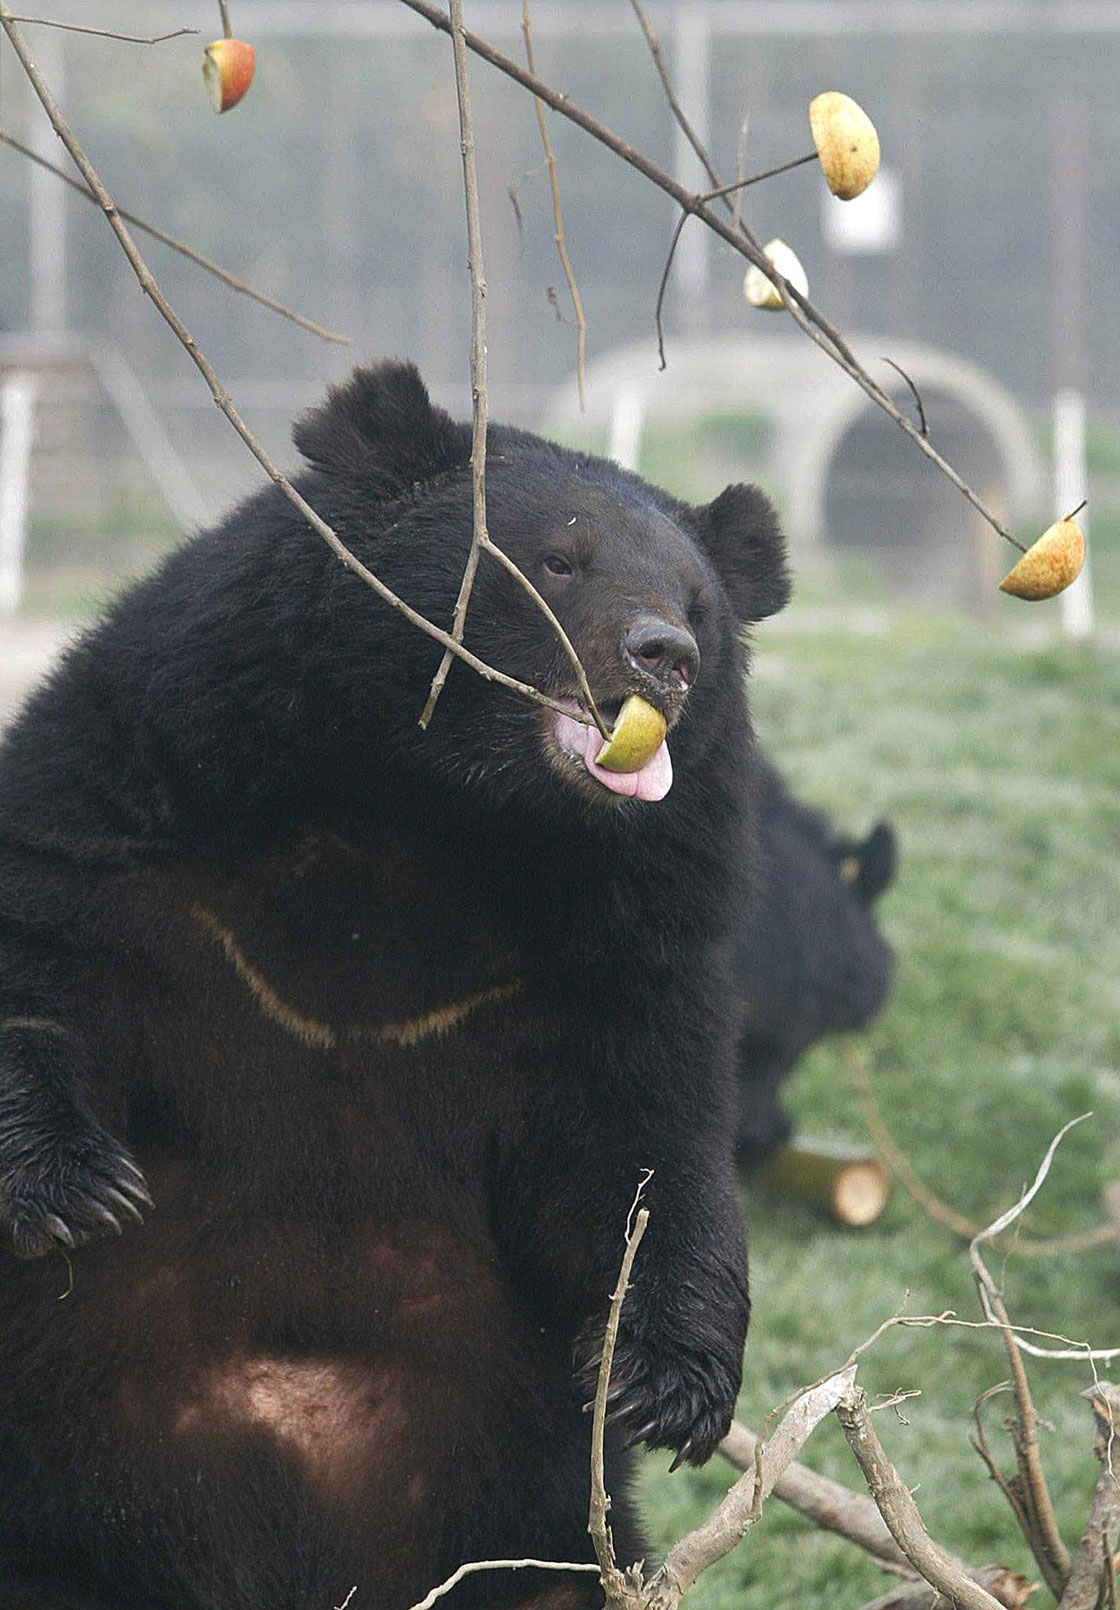 A rescued Black Bear reaches for an apple in a sanctuary at the Moon Bear Rescue Center in Southwest China. The opening of the rescue center in 2002 is part of a campaign to curb bear bile farming for medical purposes.